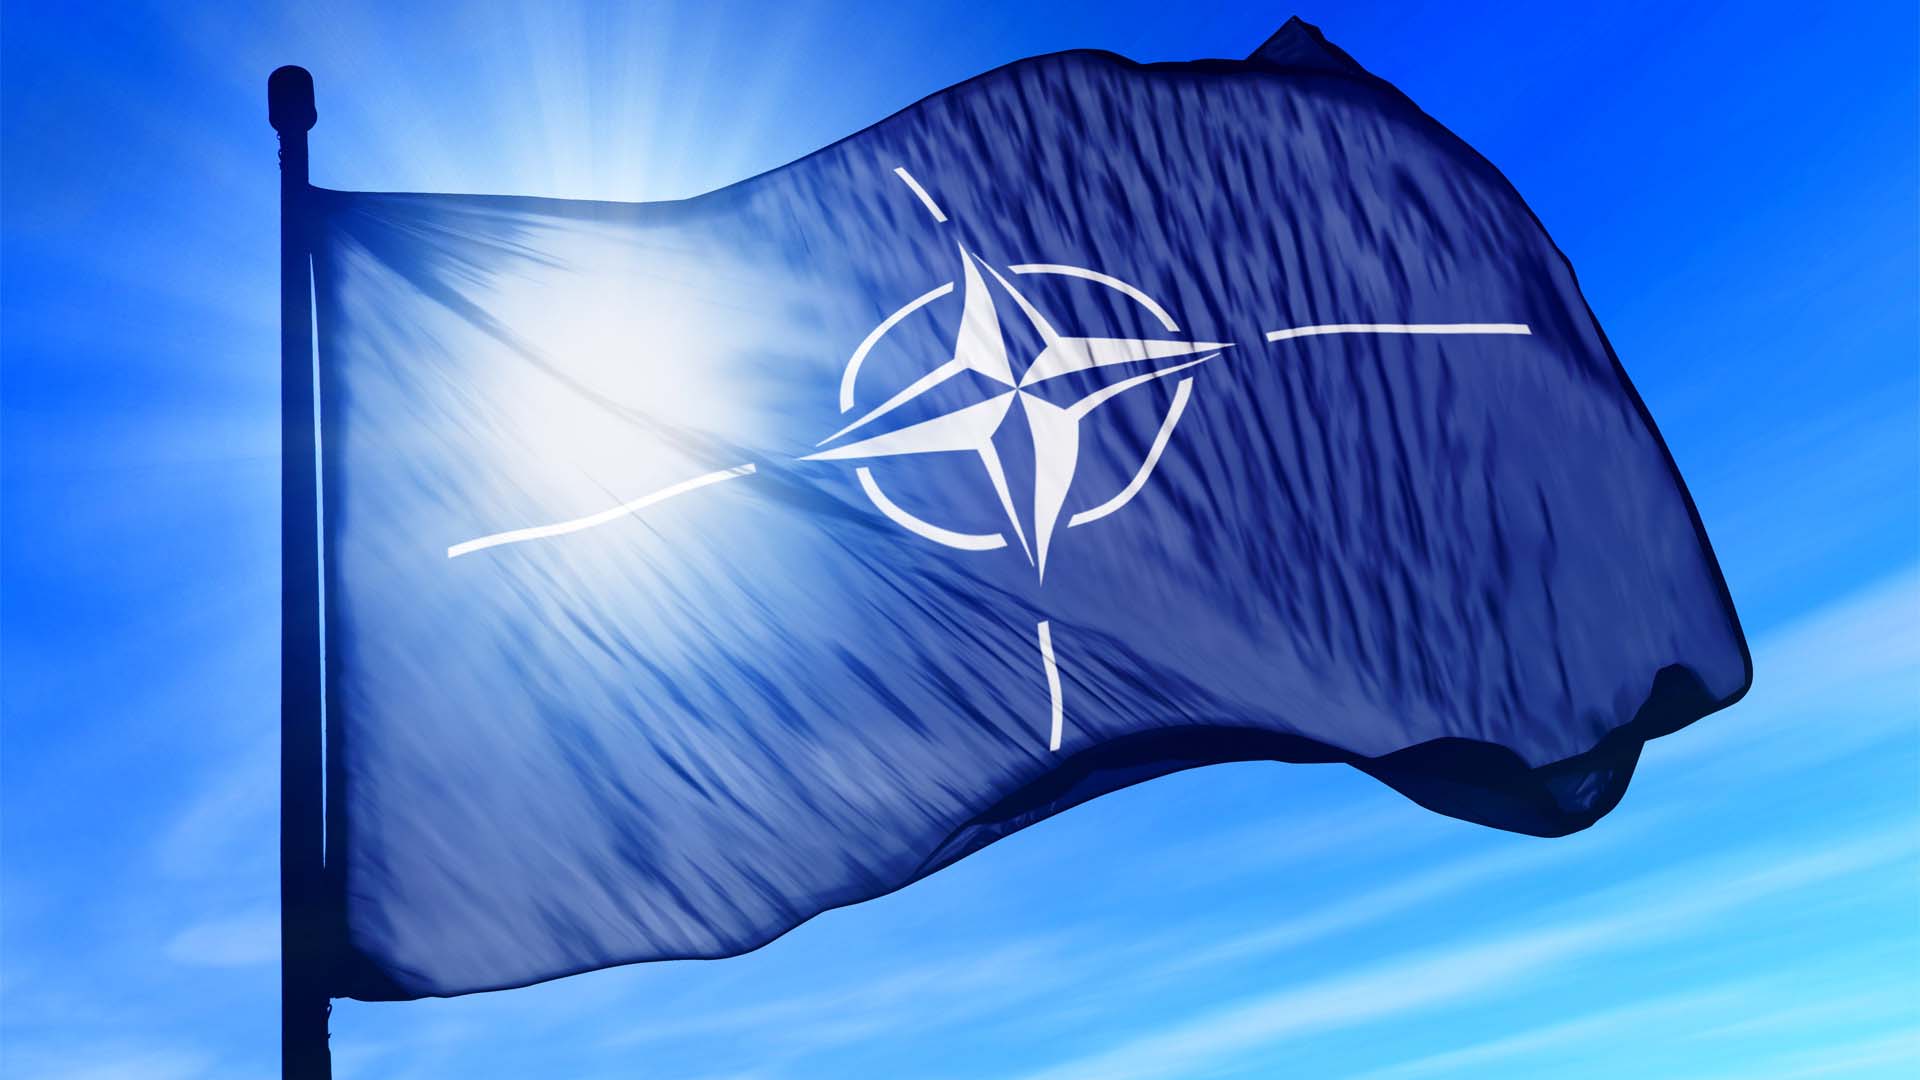 Should NATO do more for Middle East security?